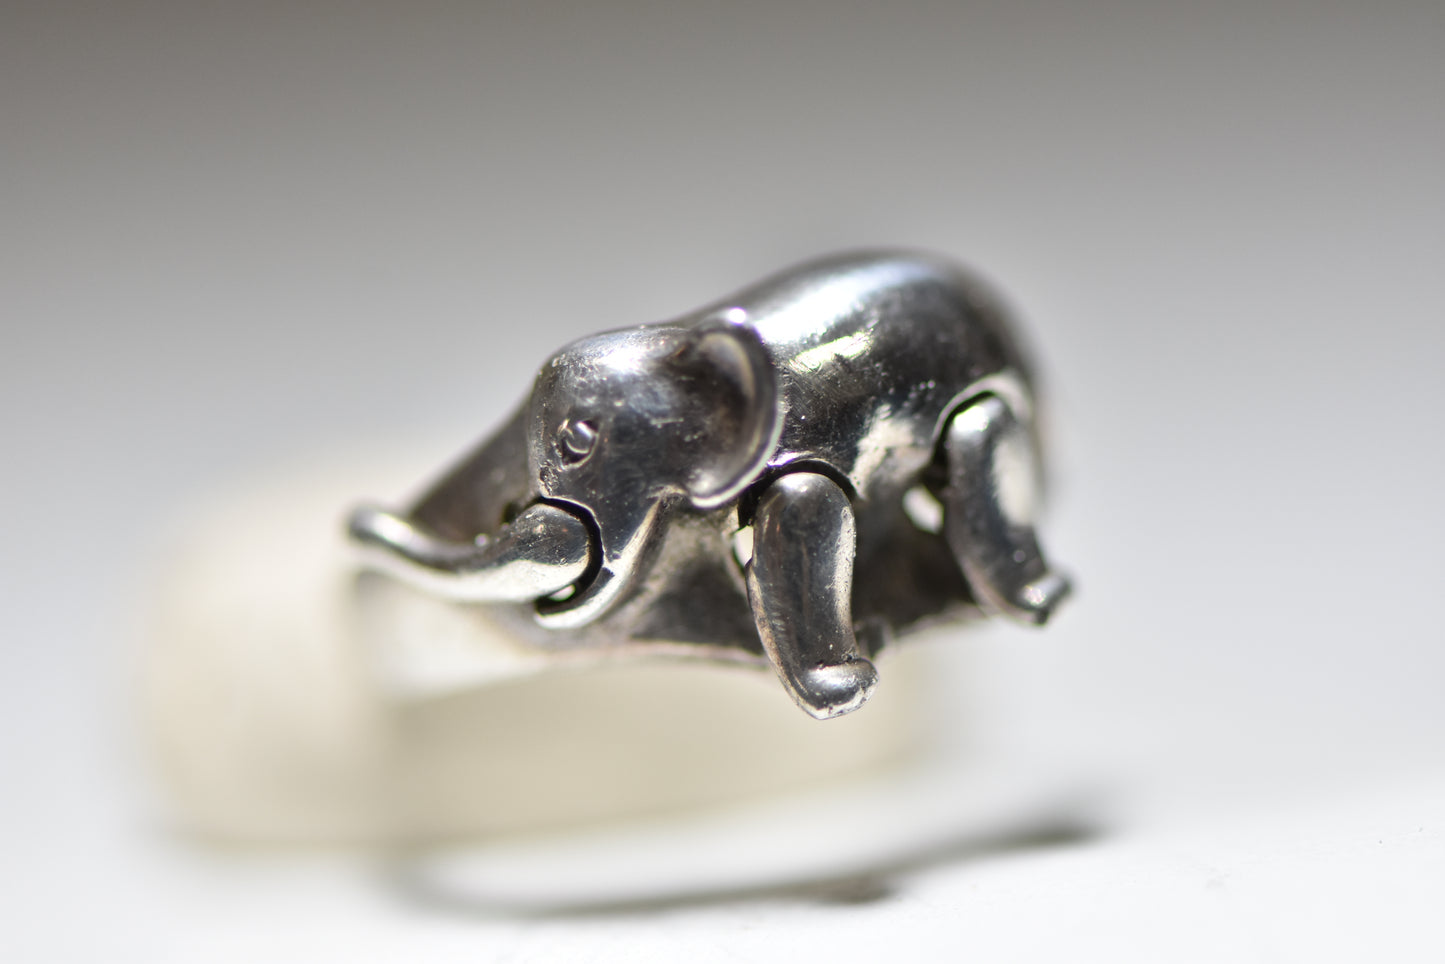 Elephant Ring moving elephant band sterling silver women